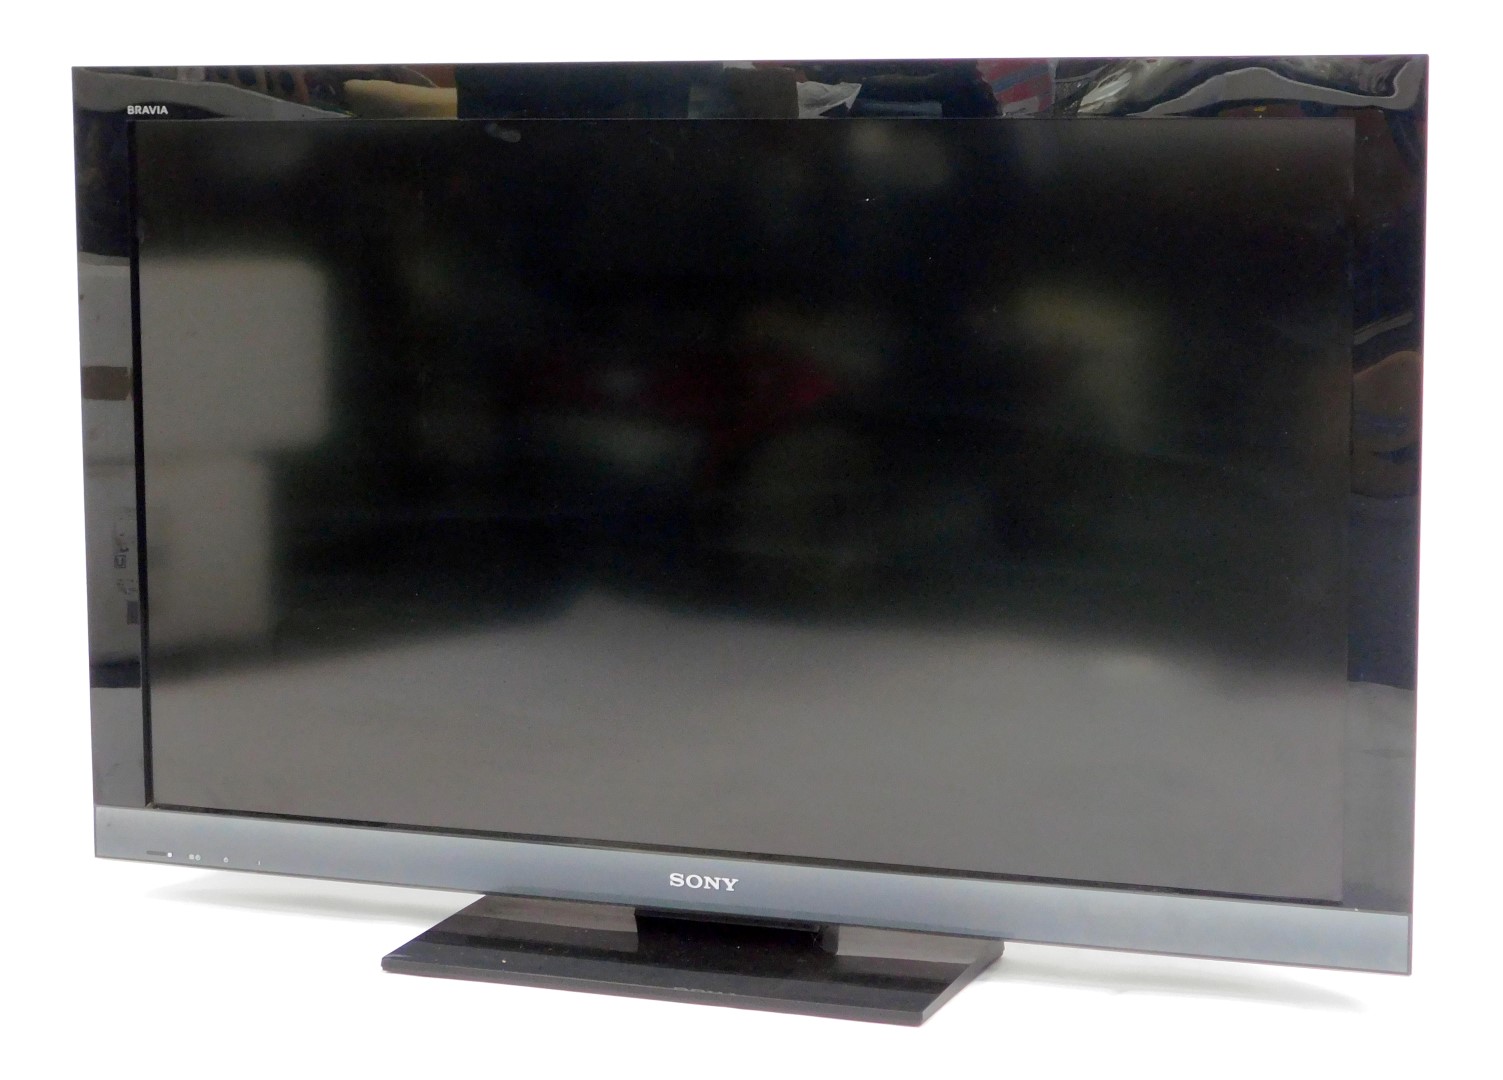 A Sony Bravia 46" LCD digital colour television, model number KDL-46EX403, with remote.